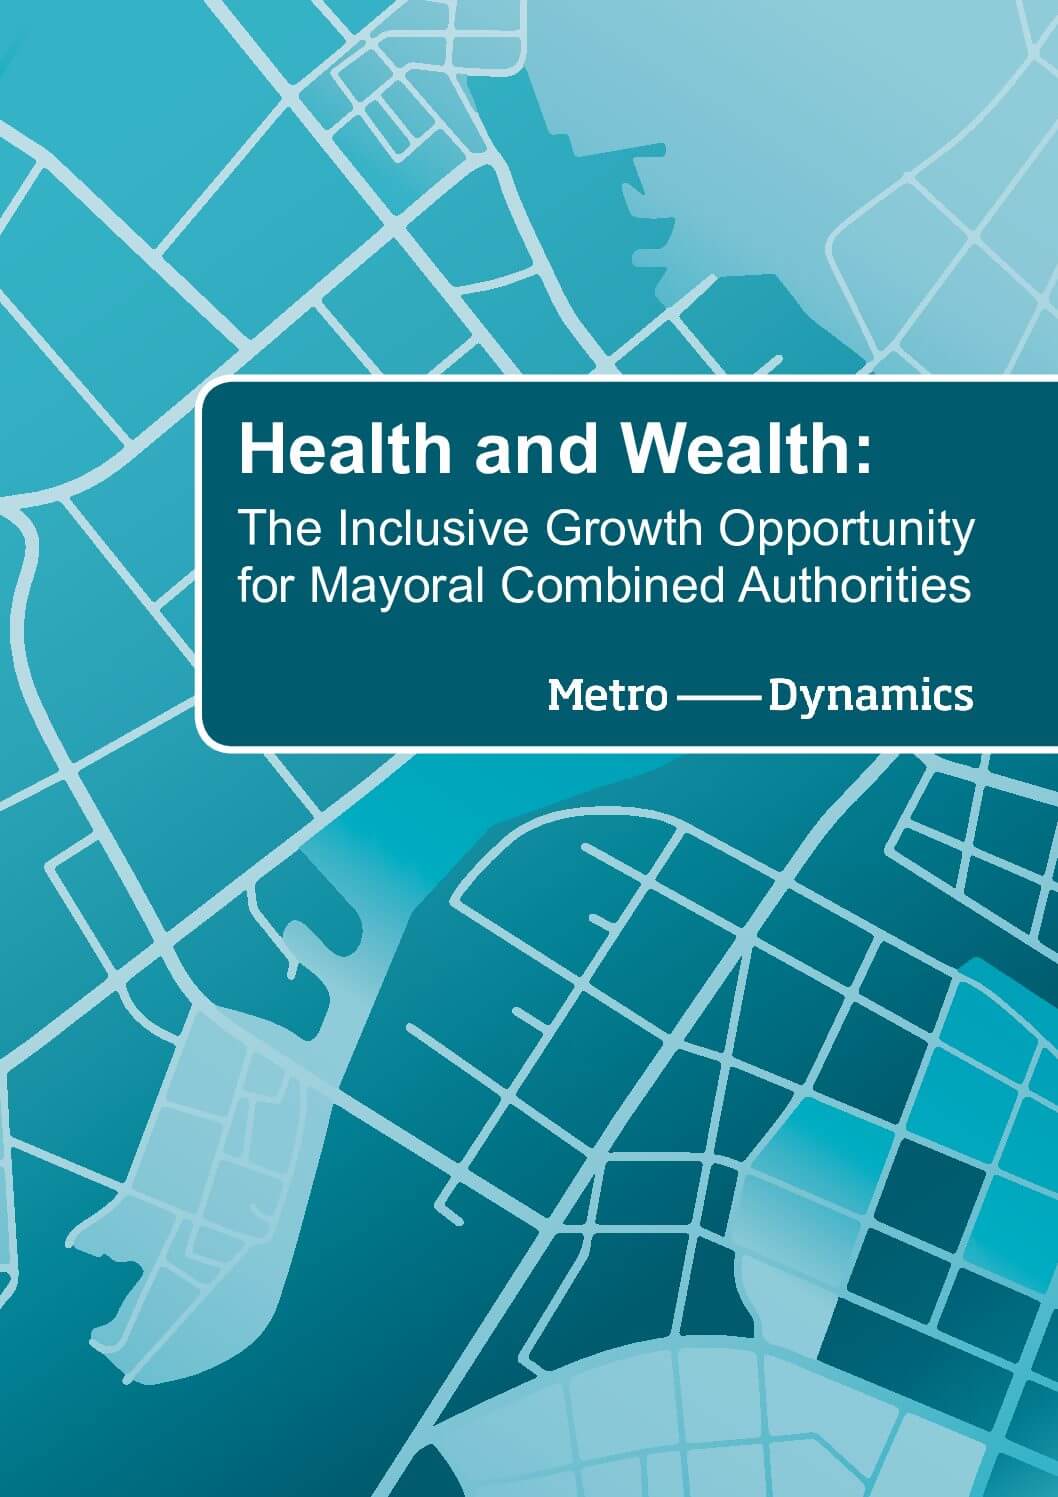 Health and Wealth – the inclusive growth opportunity for mayoral combined authorities